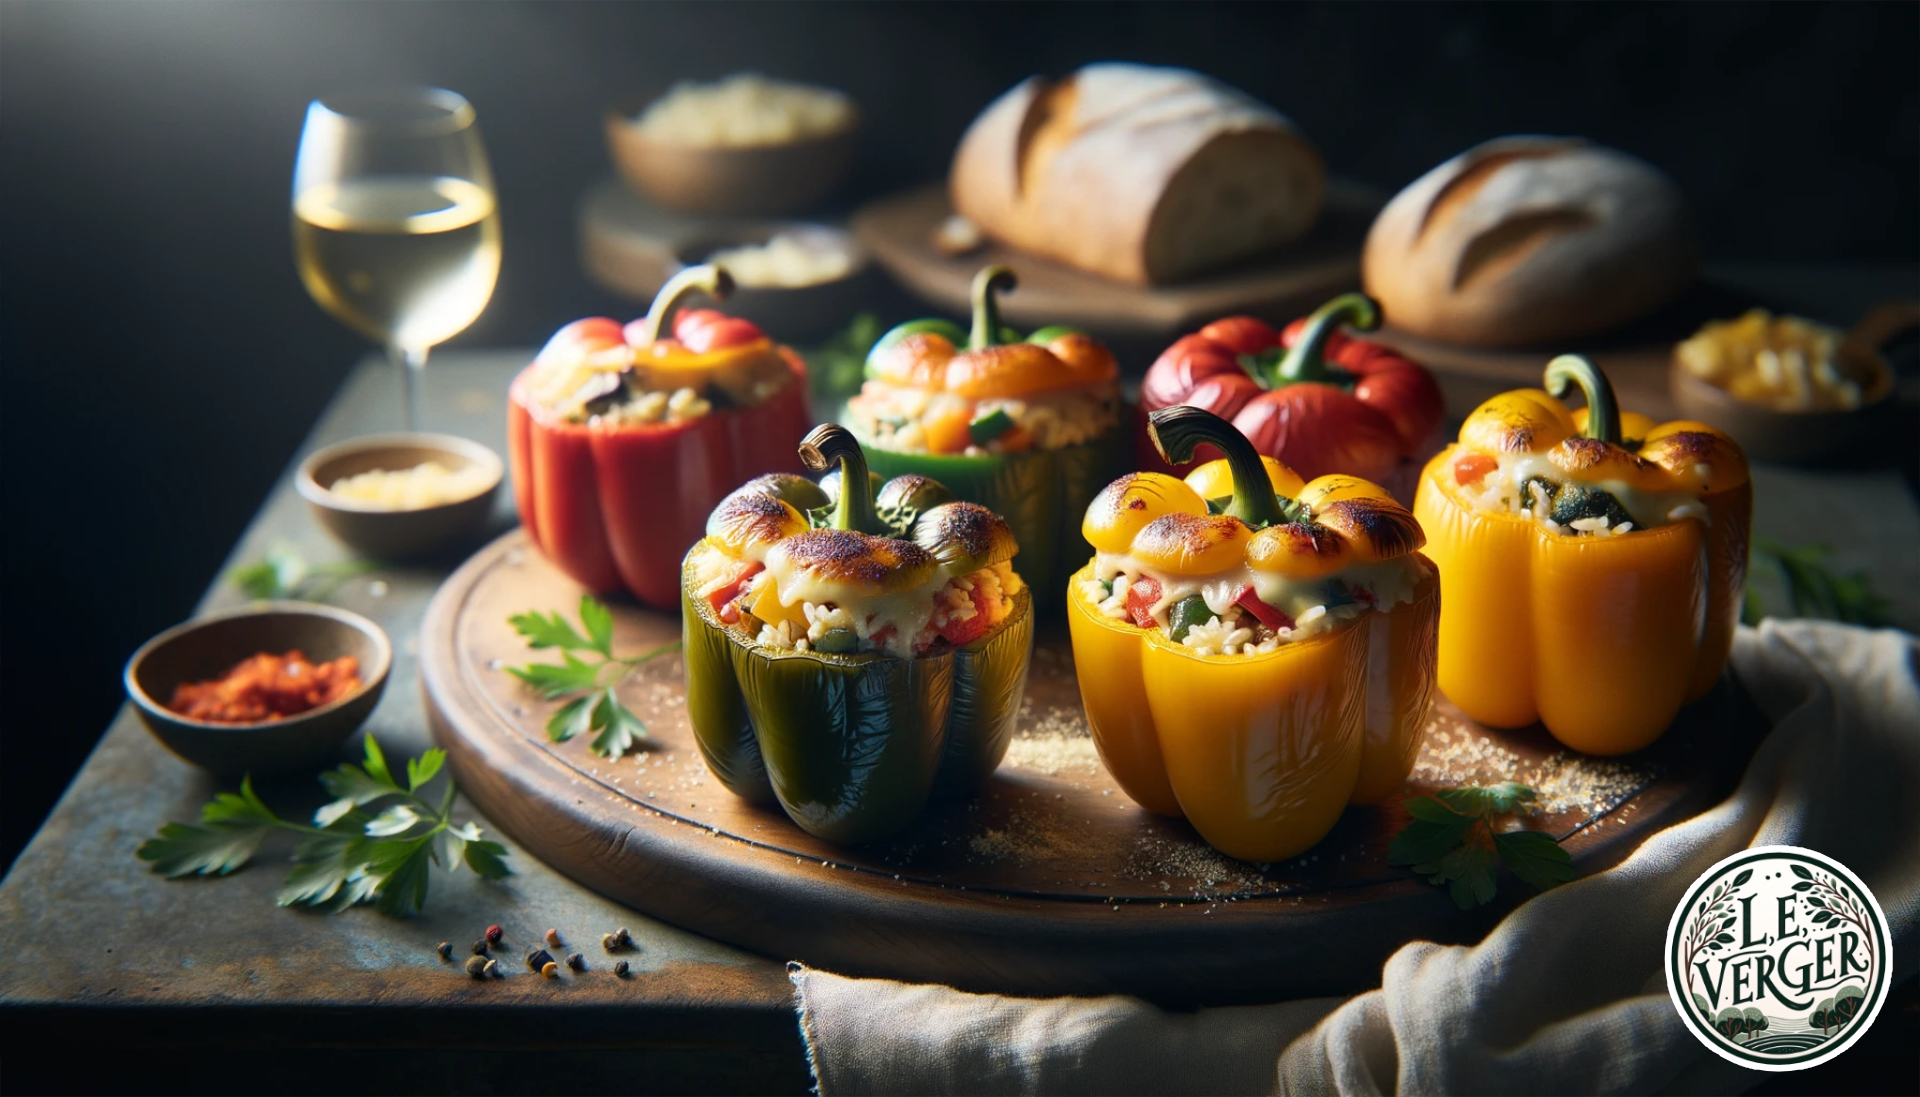 Photo showcasing an array of Stuffed Bell Peppers on an elegant wooden board, evoking the style of high-end British culinary marketing. The peppers, in various colours, are cut open slightly at the top, revealing the sumptuous filling of rice, vegetables, and cheese. The cheese has a golden-brown top, hinting at a brief bake. Soft ambient light casts gentle shadows, accentuating the textures. In the background, there's a glass of white wine and a rustic loaf of bread, completing the luxurious dining experience.